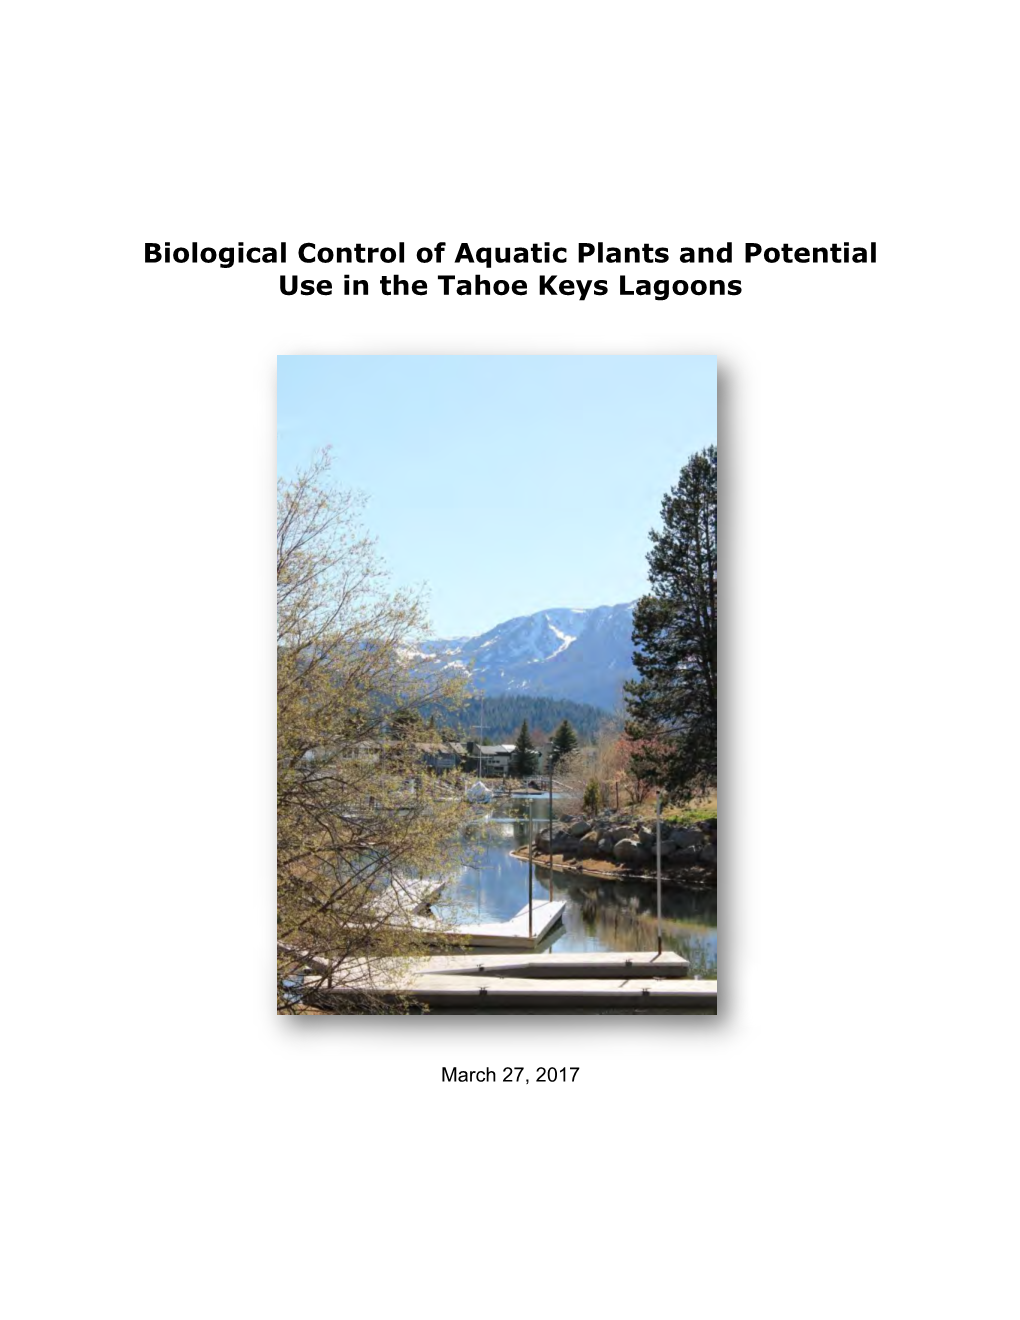 Biological Control of Aquatic Plants and Potential Use in the Tahoe Keys Lagoons